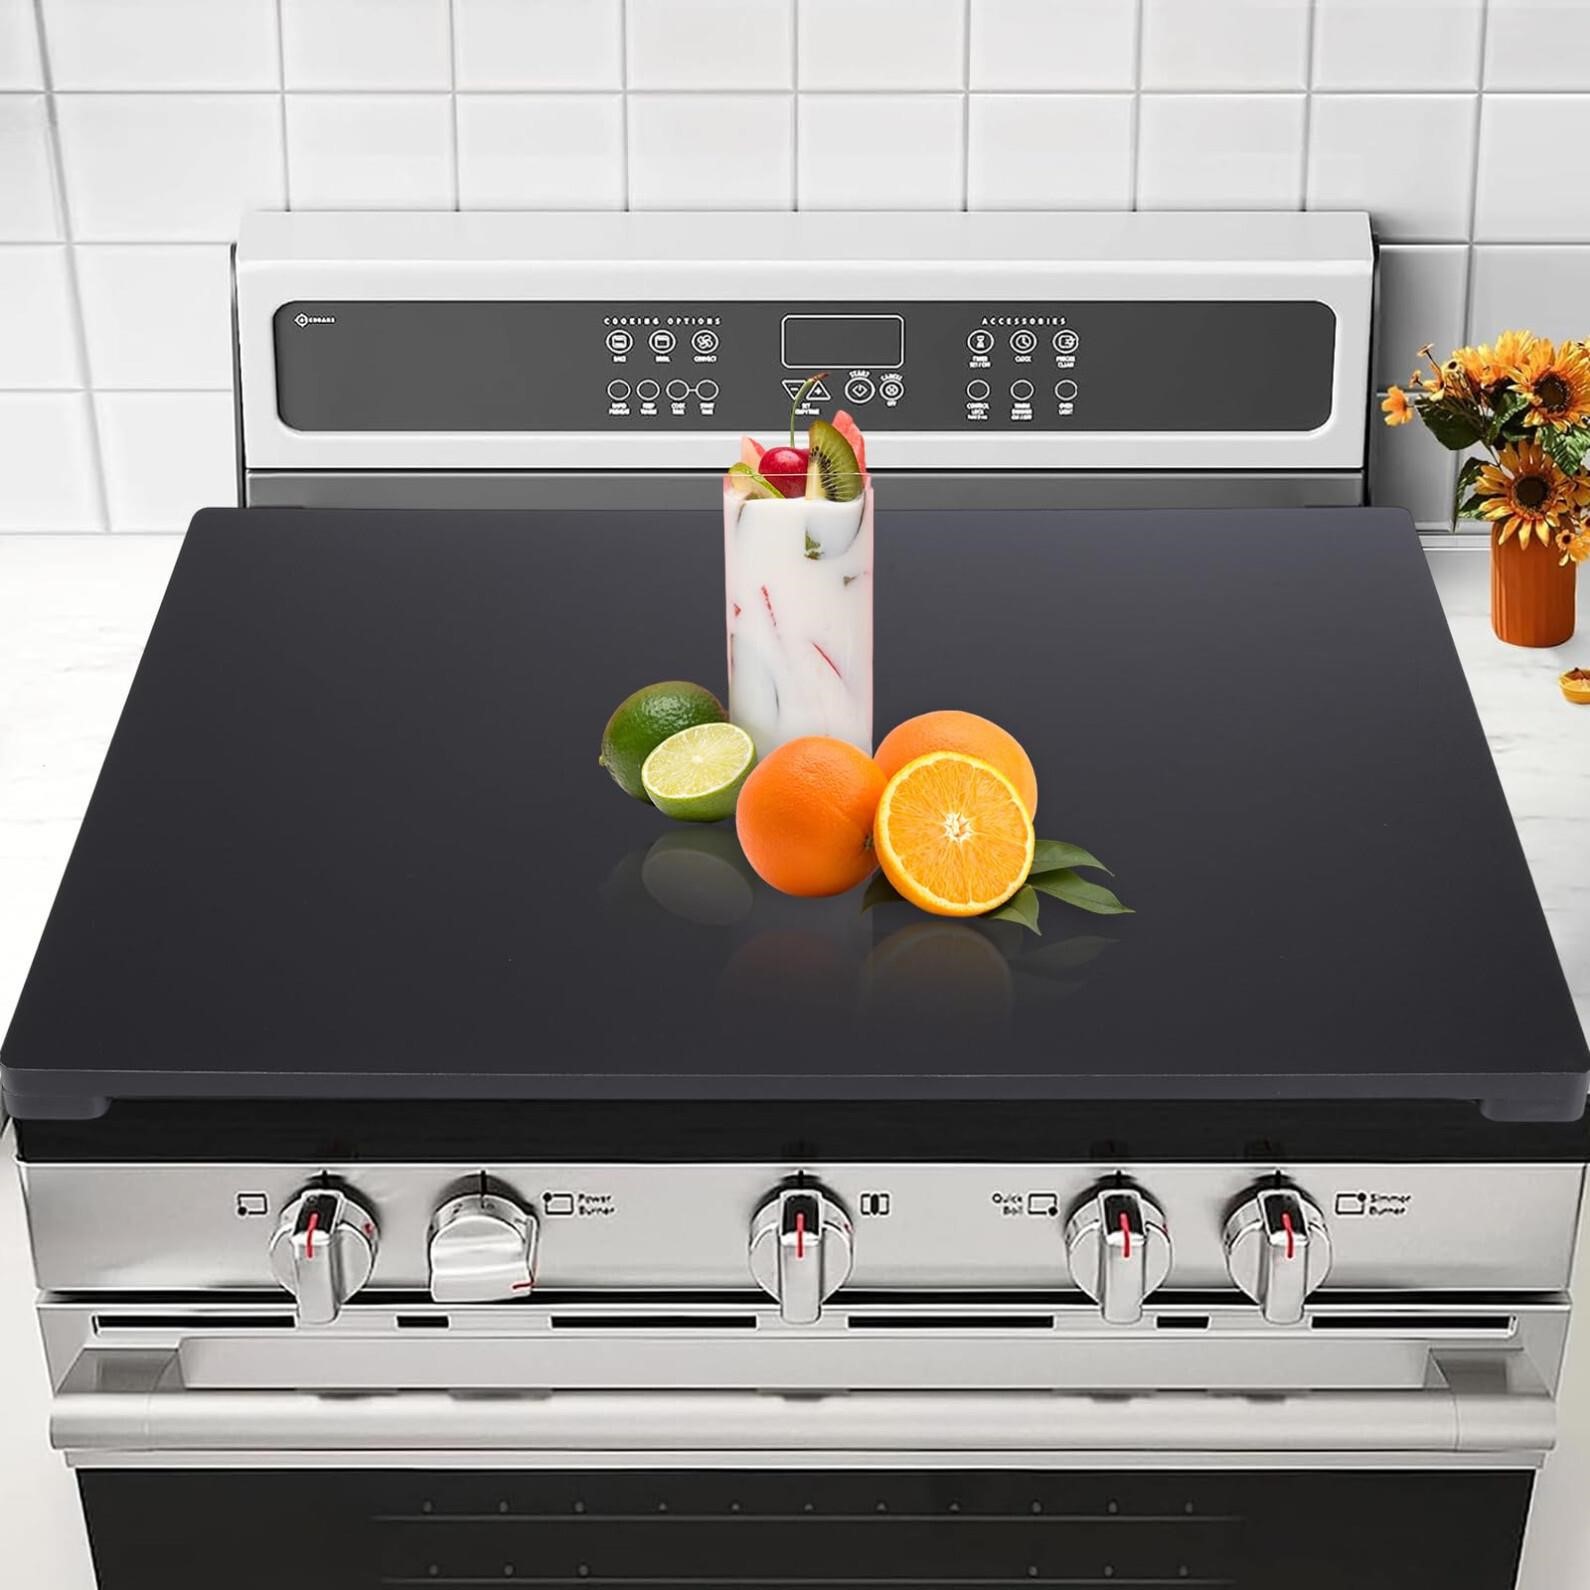 Noodle Board Stove Cover for Gas Burner & Electric